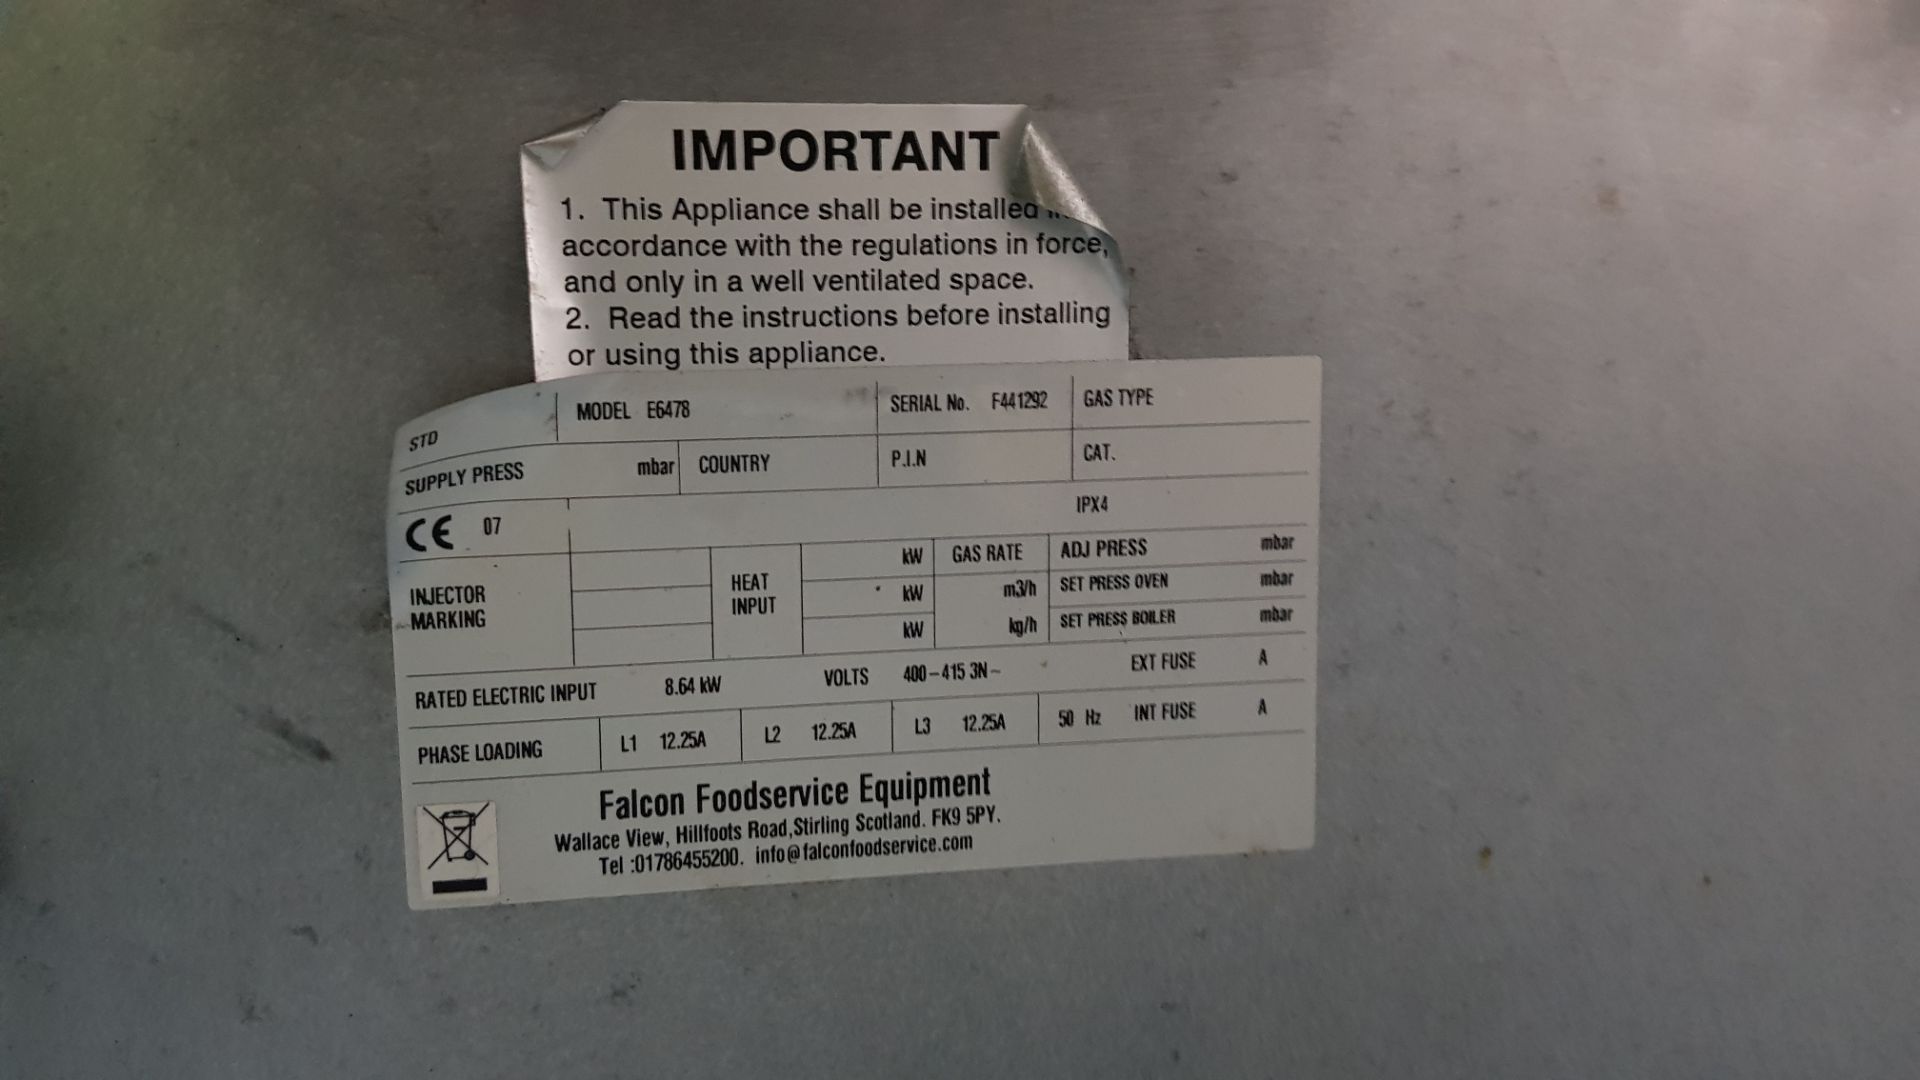 FALCON FOODSERVICE EQUIPMENT STAINLESS STEEL ATMOSPHERIC FOOD STEAMER (MODEL E6478) - Image 3 of 3